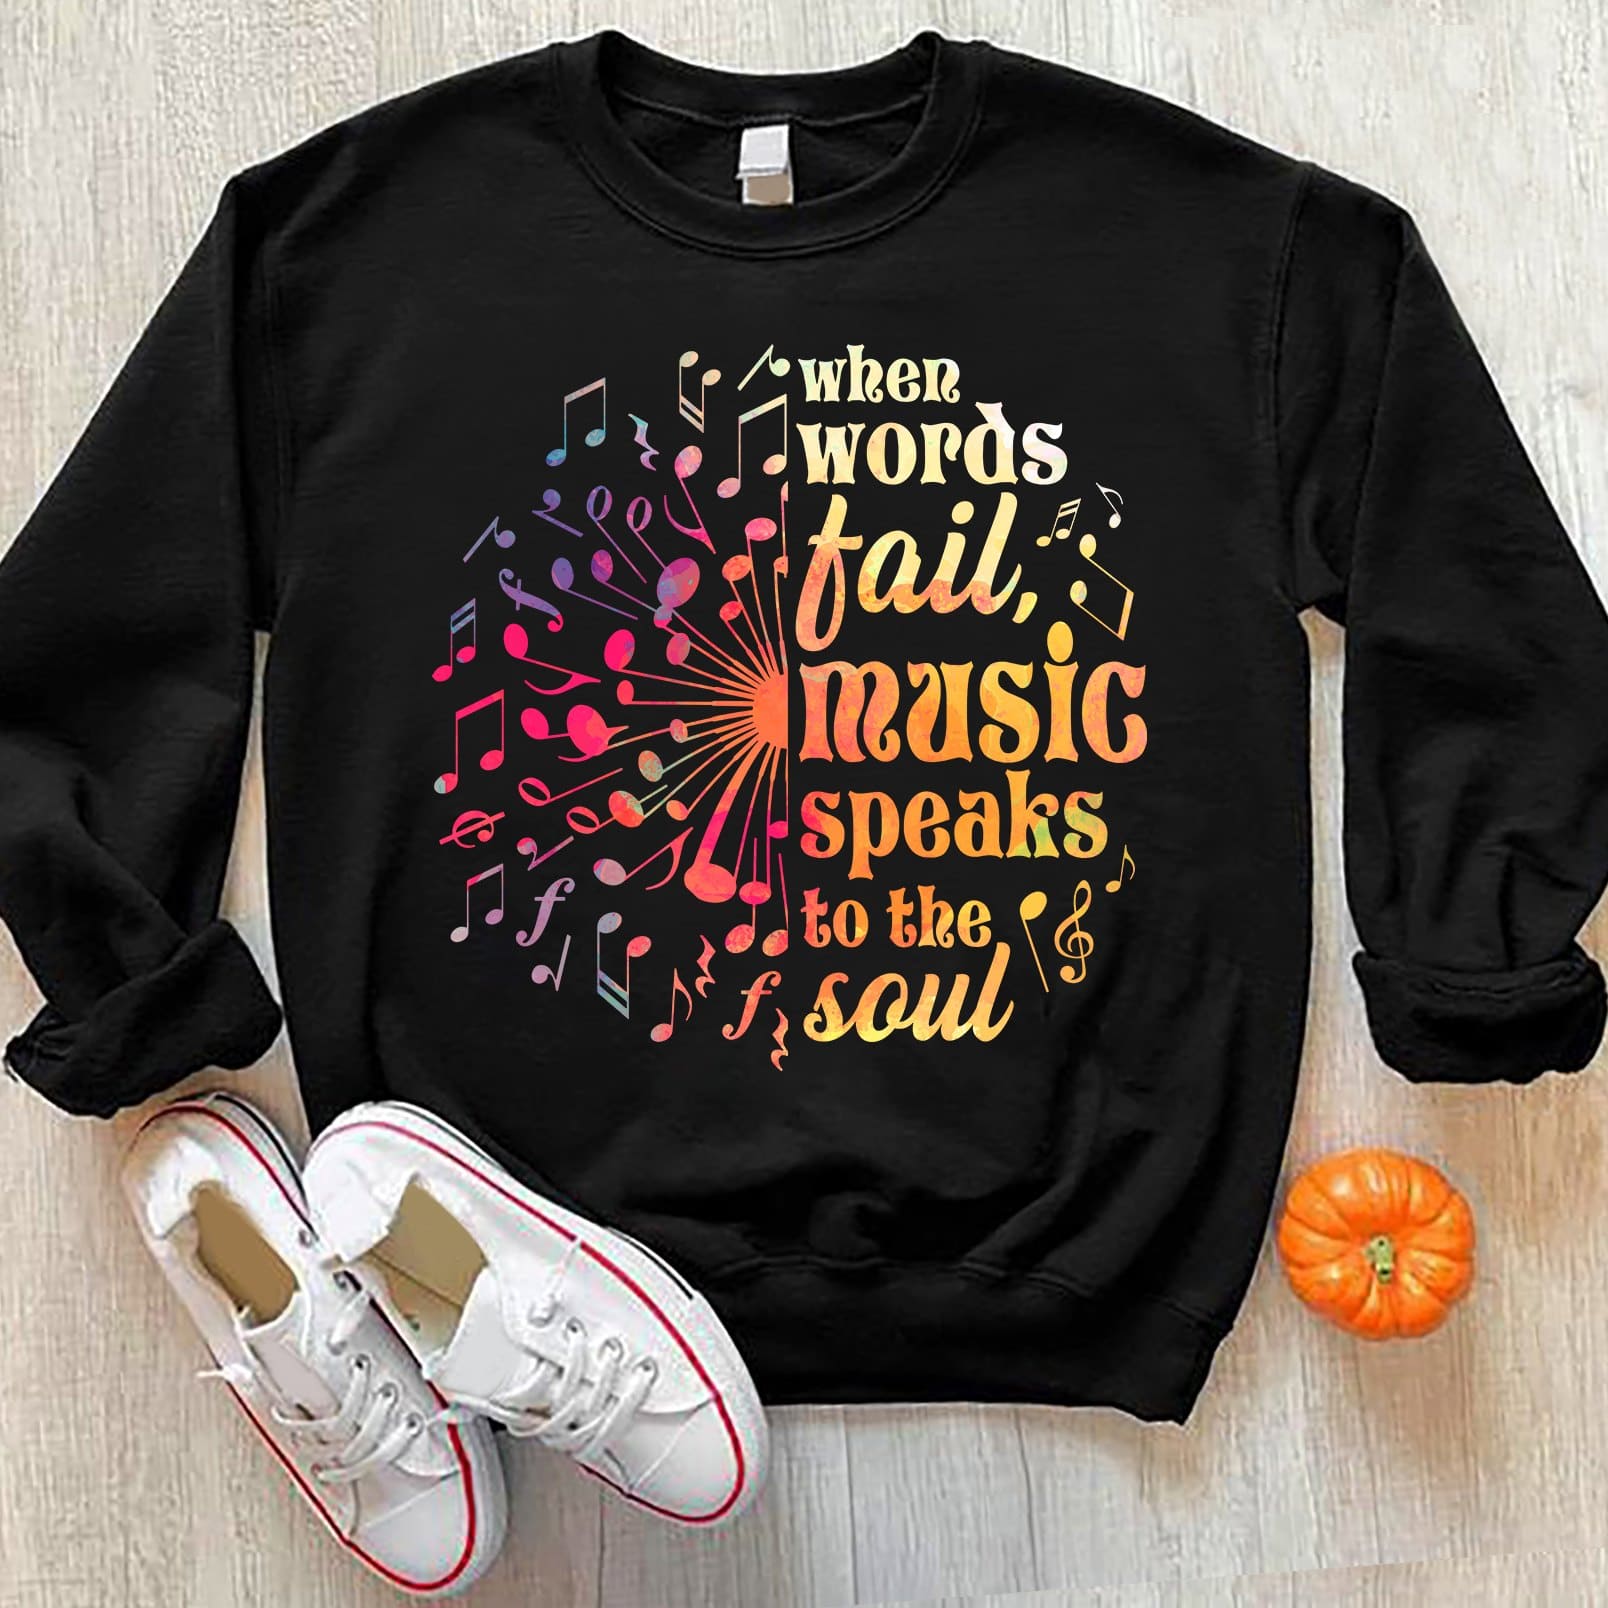 When words fail, music speaks to the soul - Music bring joy